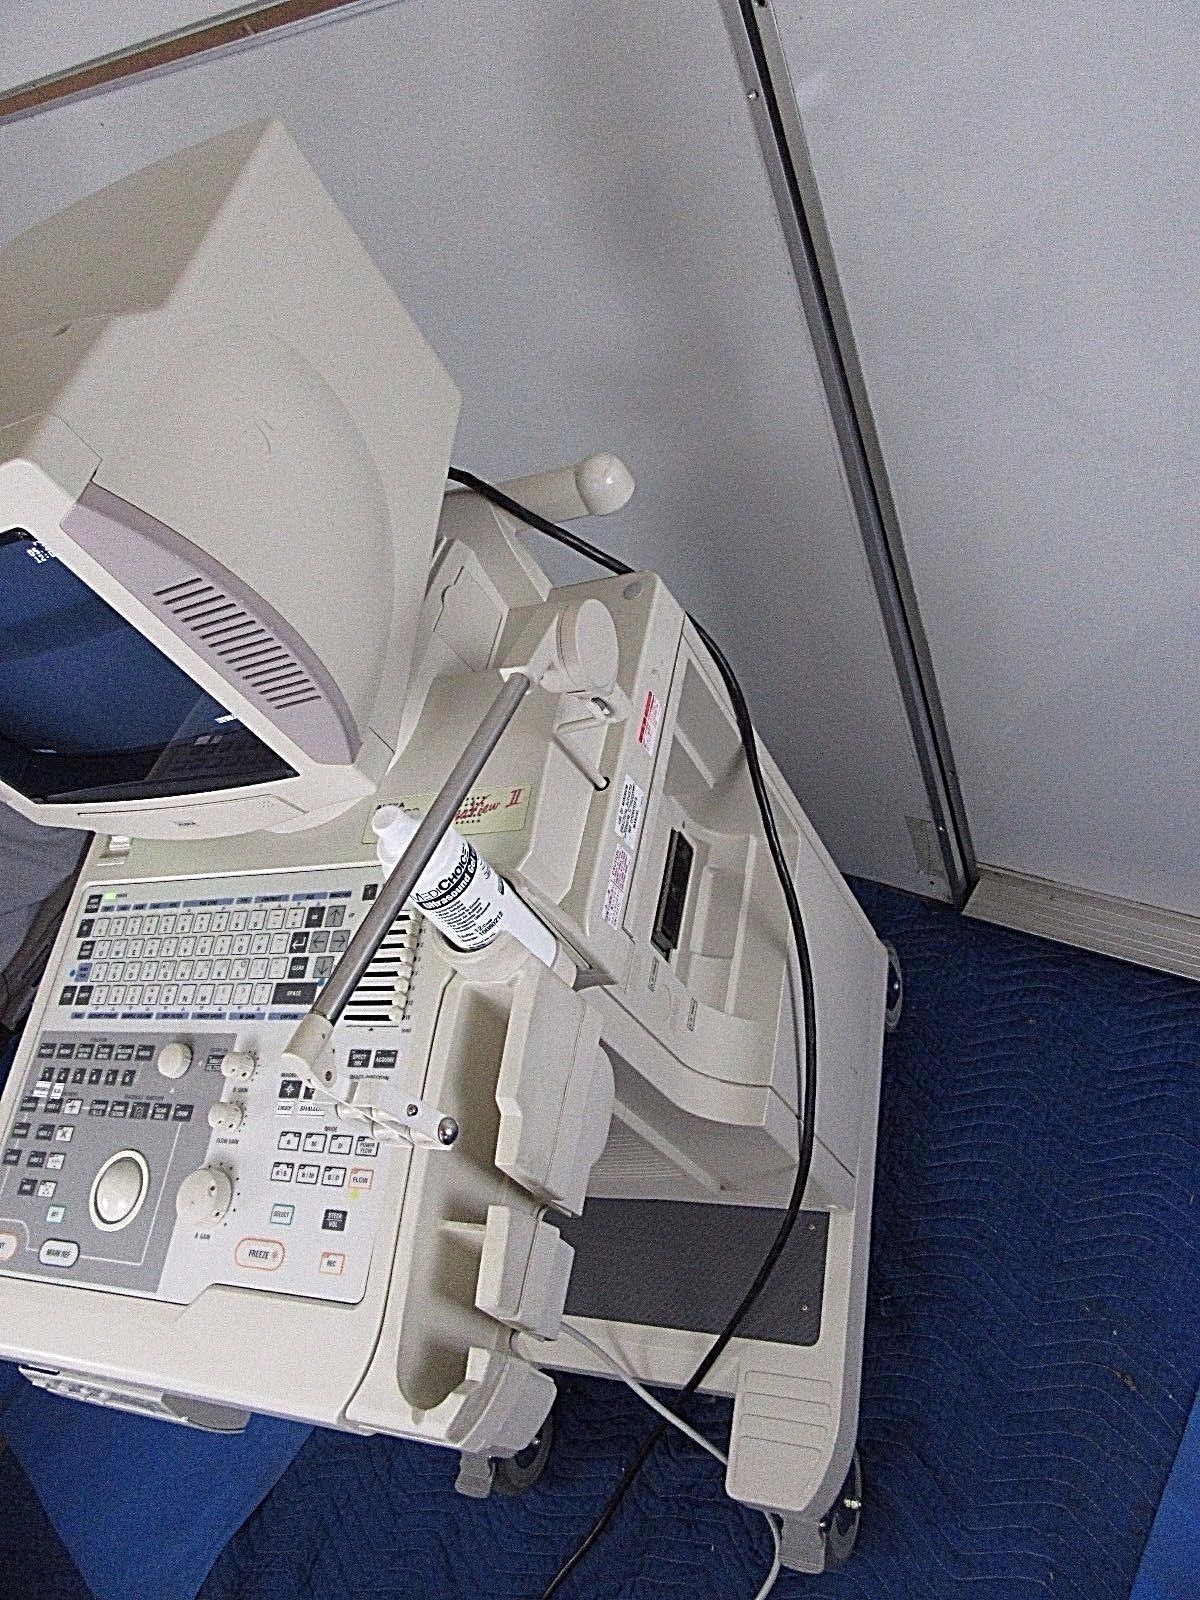 Aloka UltraSound SSD-1700 dynaview USI -140B Holiday Special!!! DIAGNOSTIC ULTRASOUND MACHINES FOR SALE